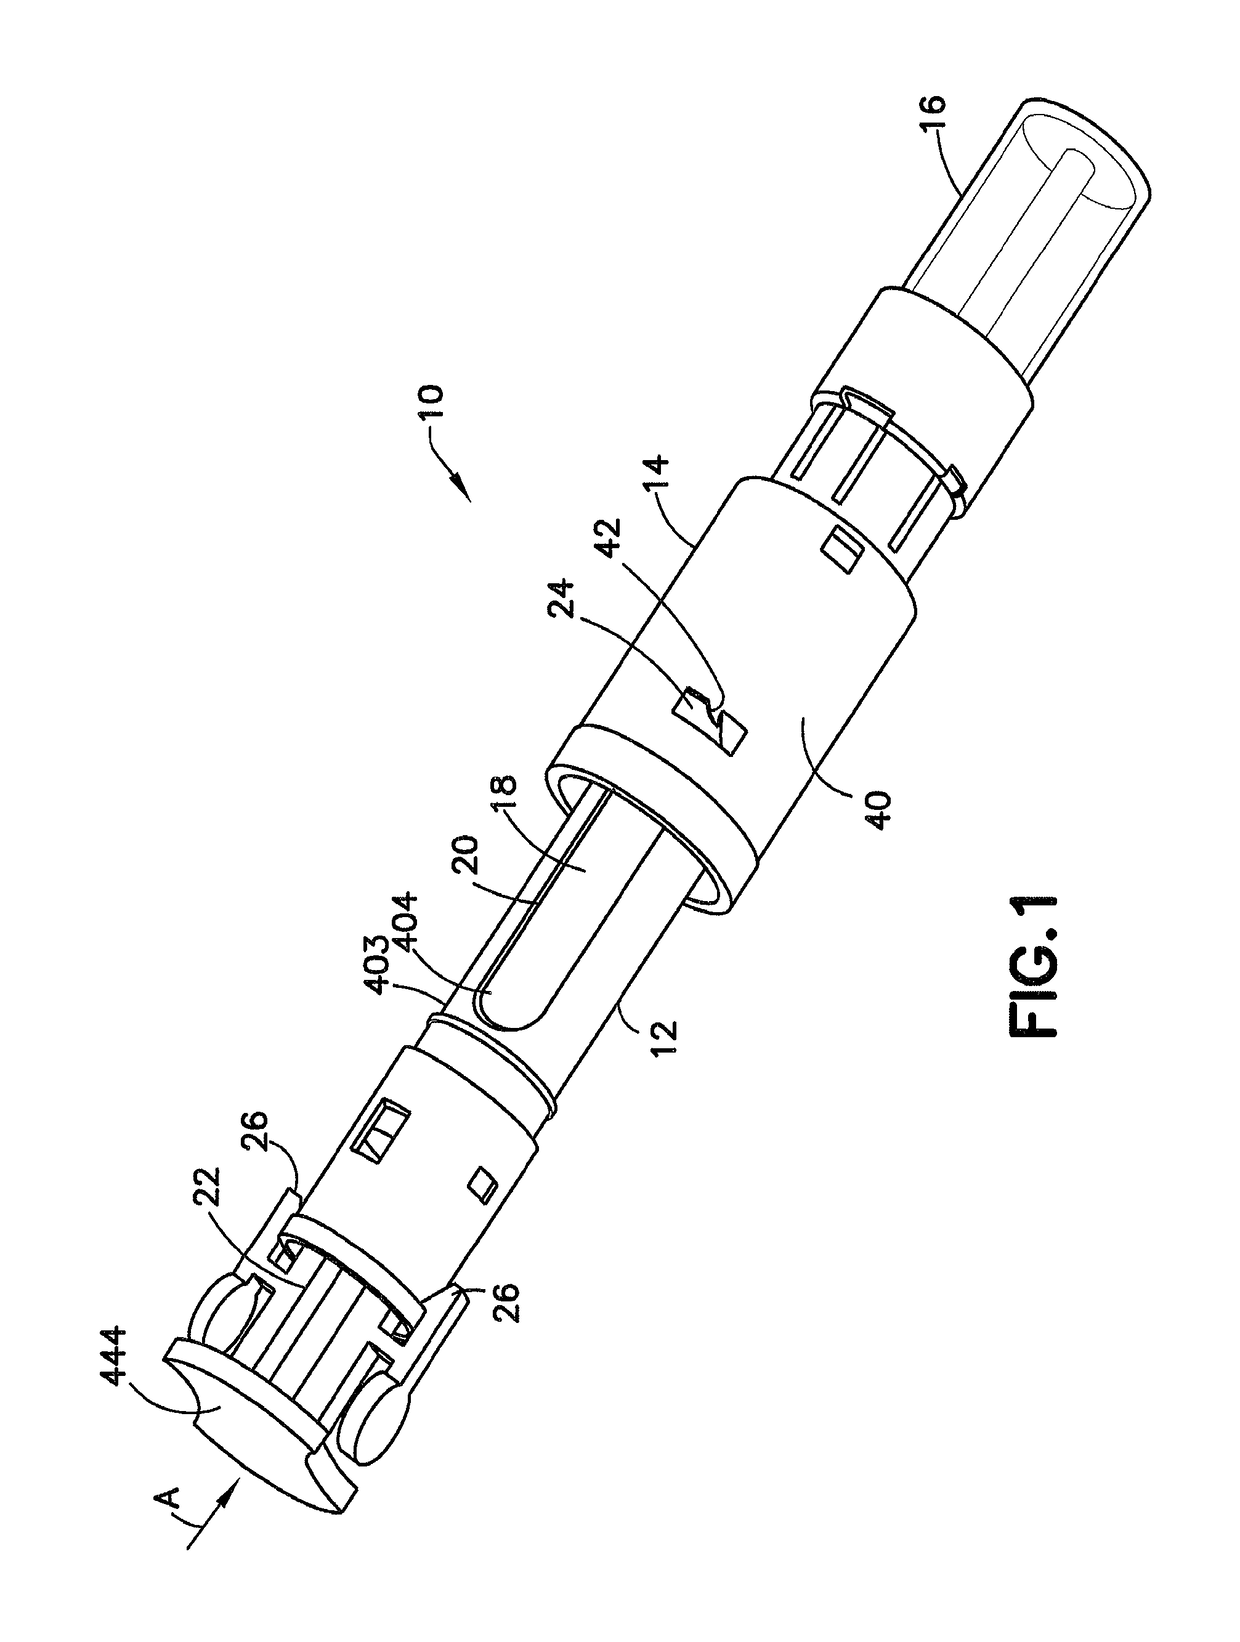 Transfer set with floating needle for drug reconstitution